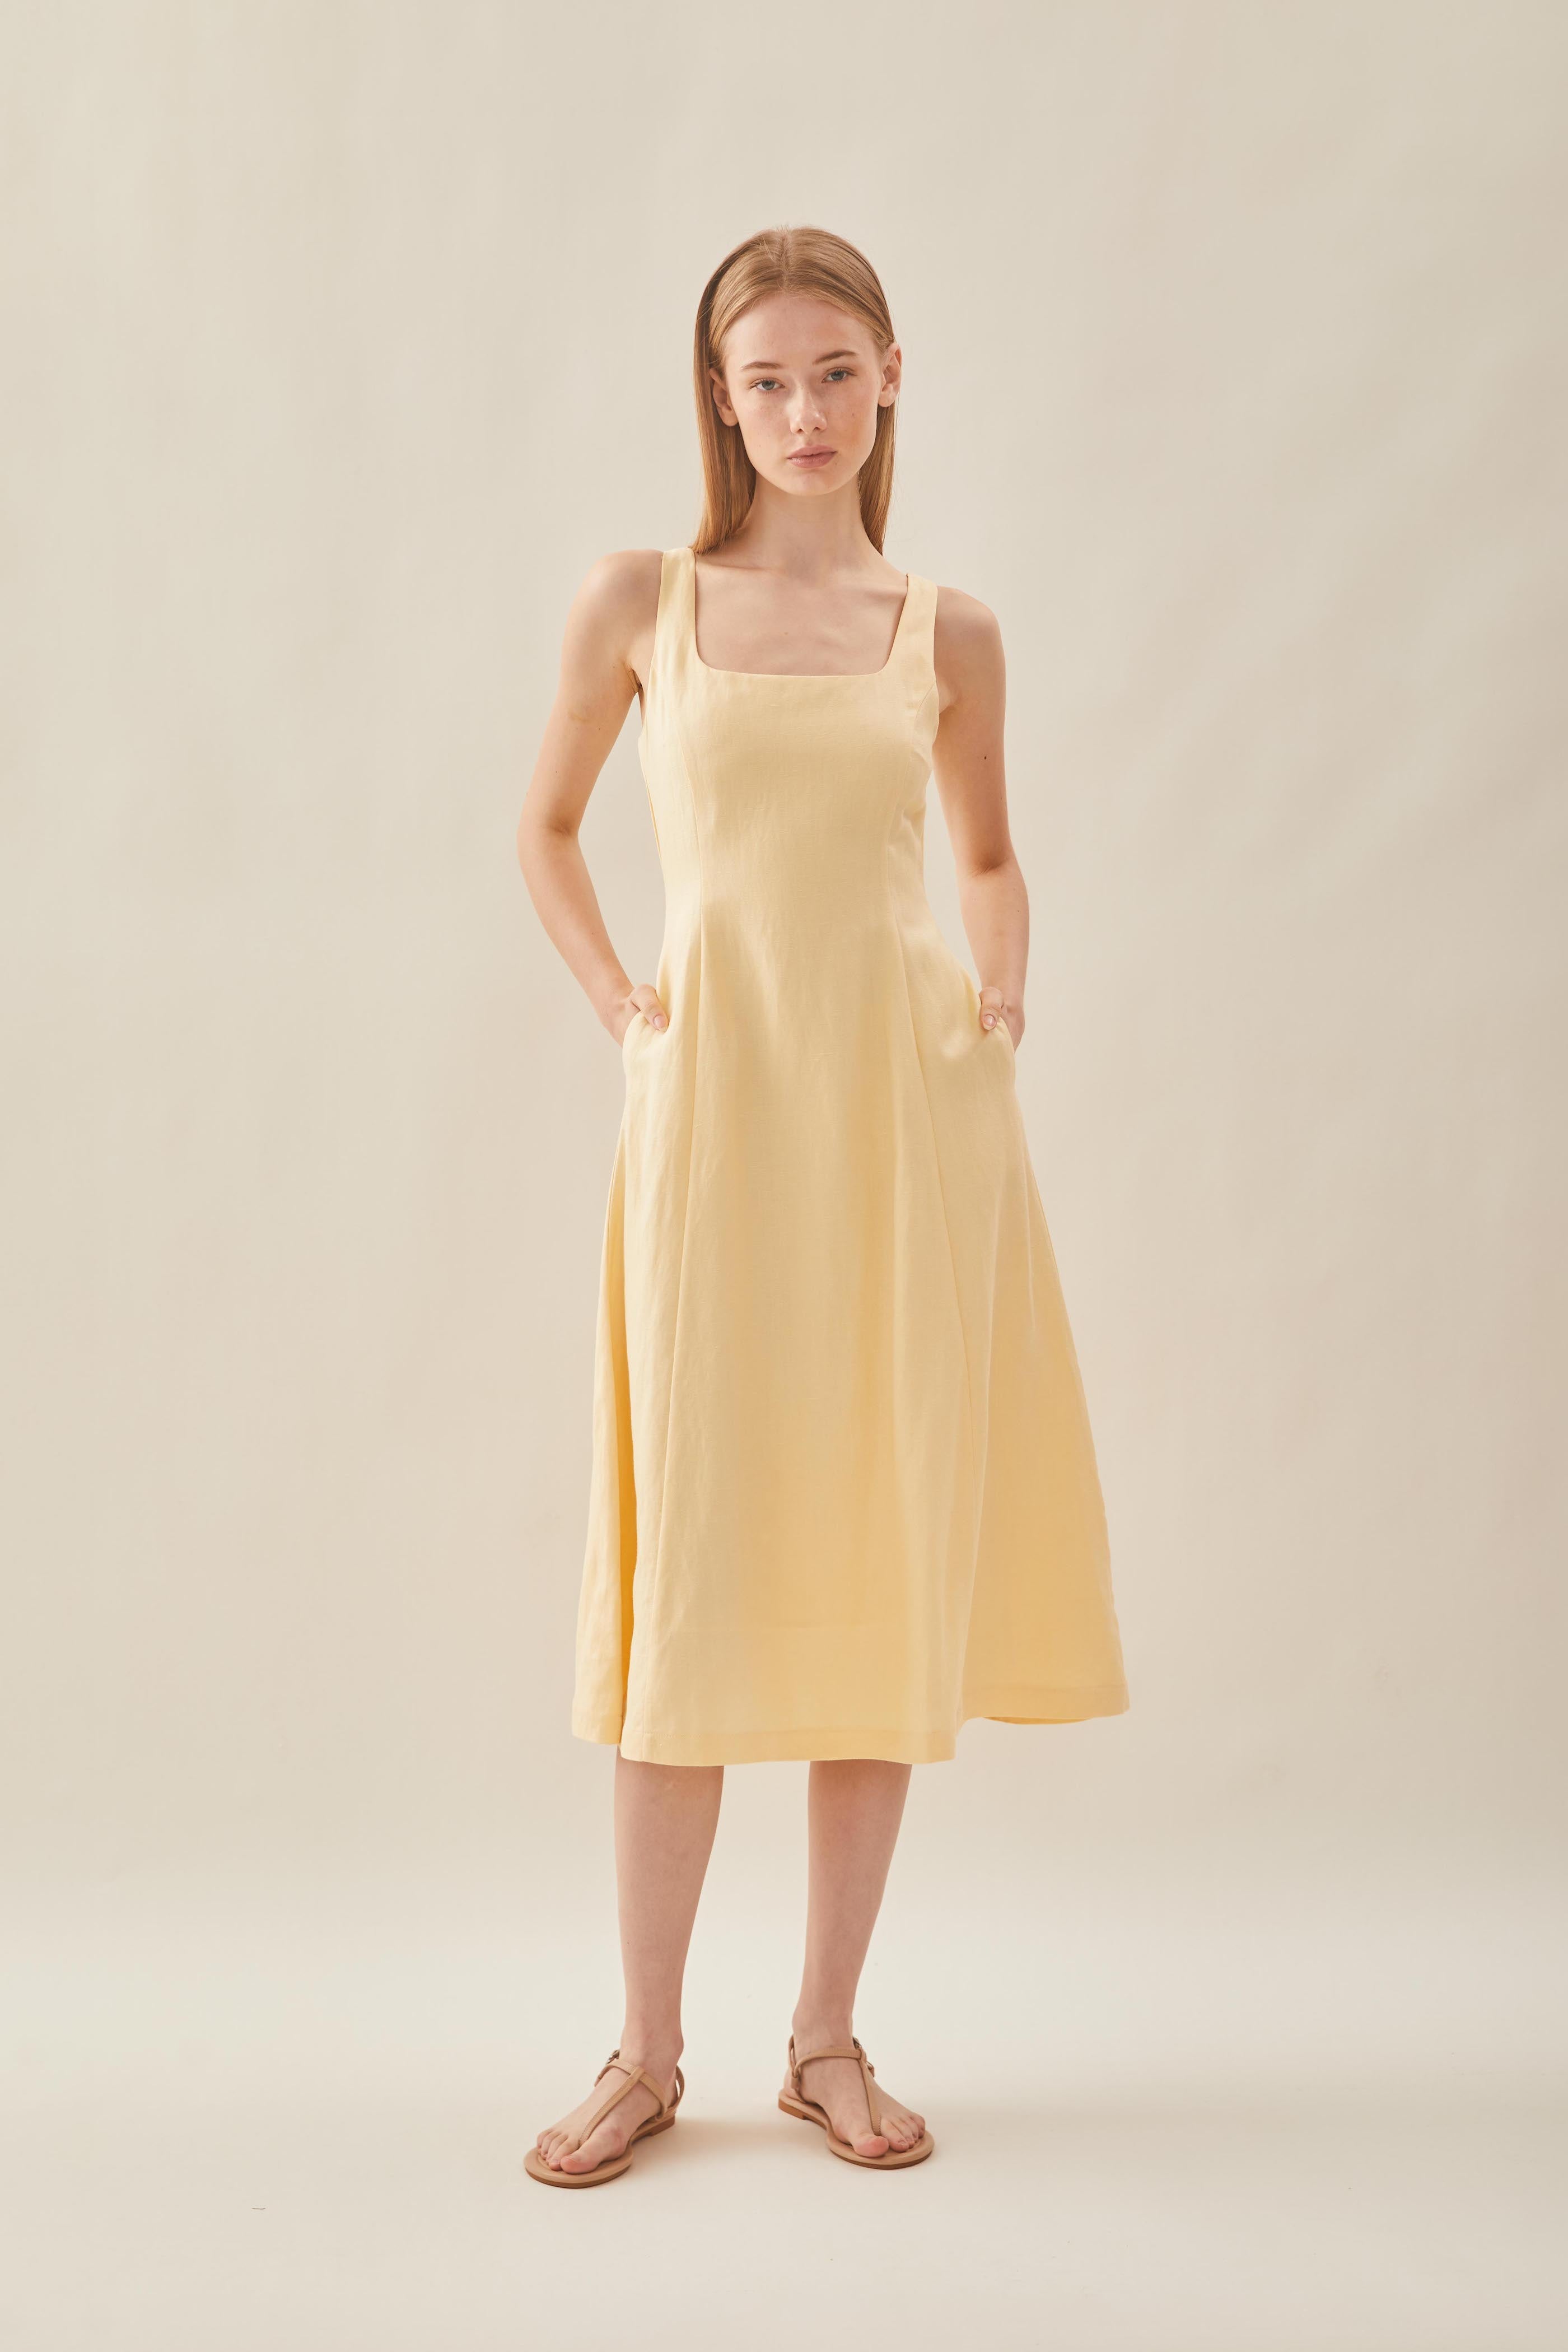 Scoop Neck Flare Dress in Pale Yellow